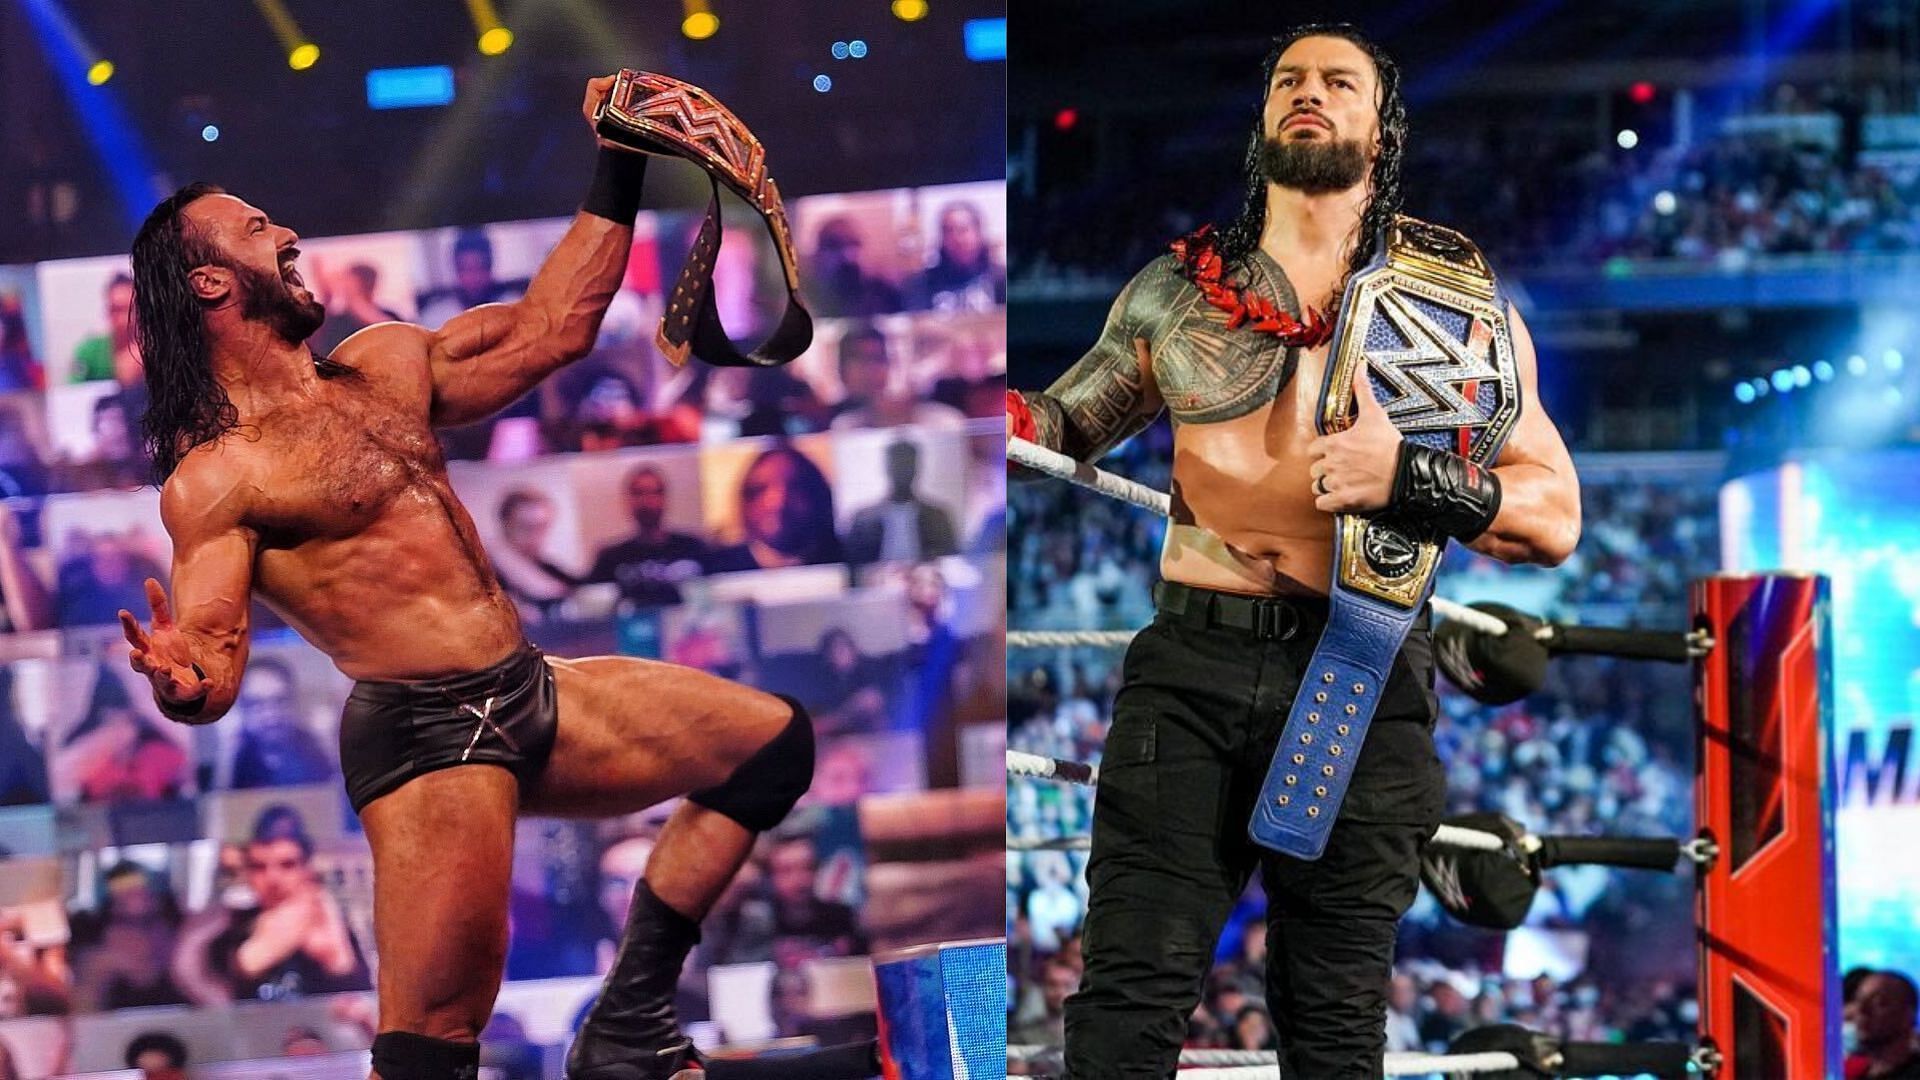 Drew McIntyre and Roman Reigns will collide at WWE Clash at the Castle.